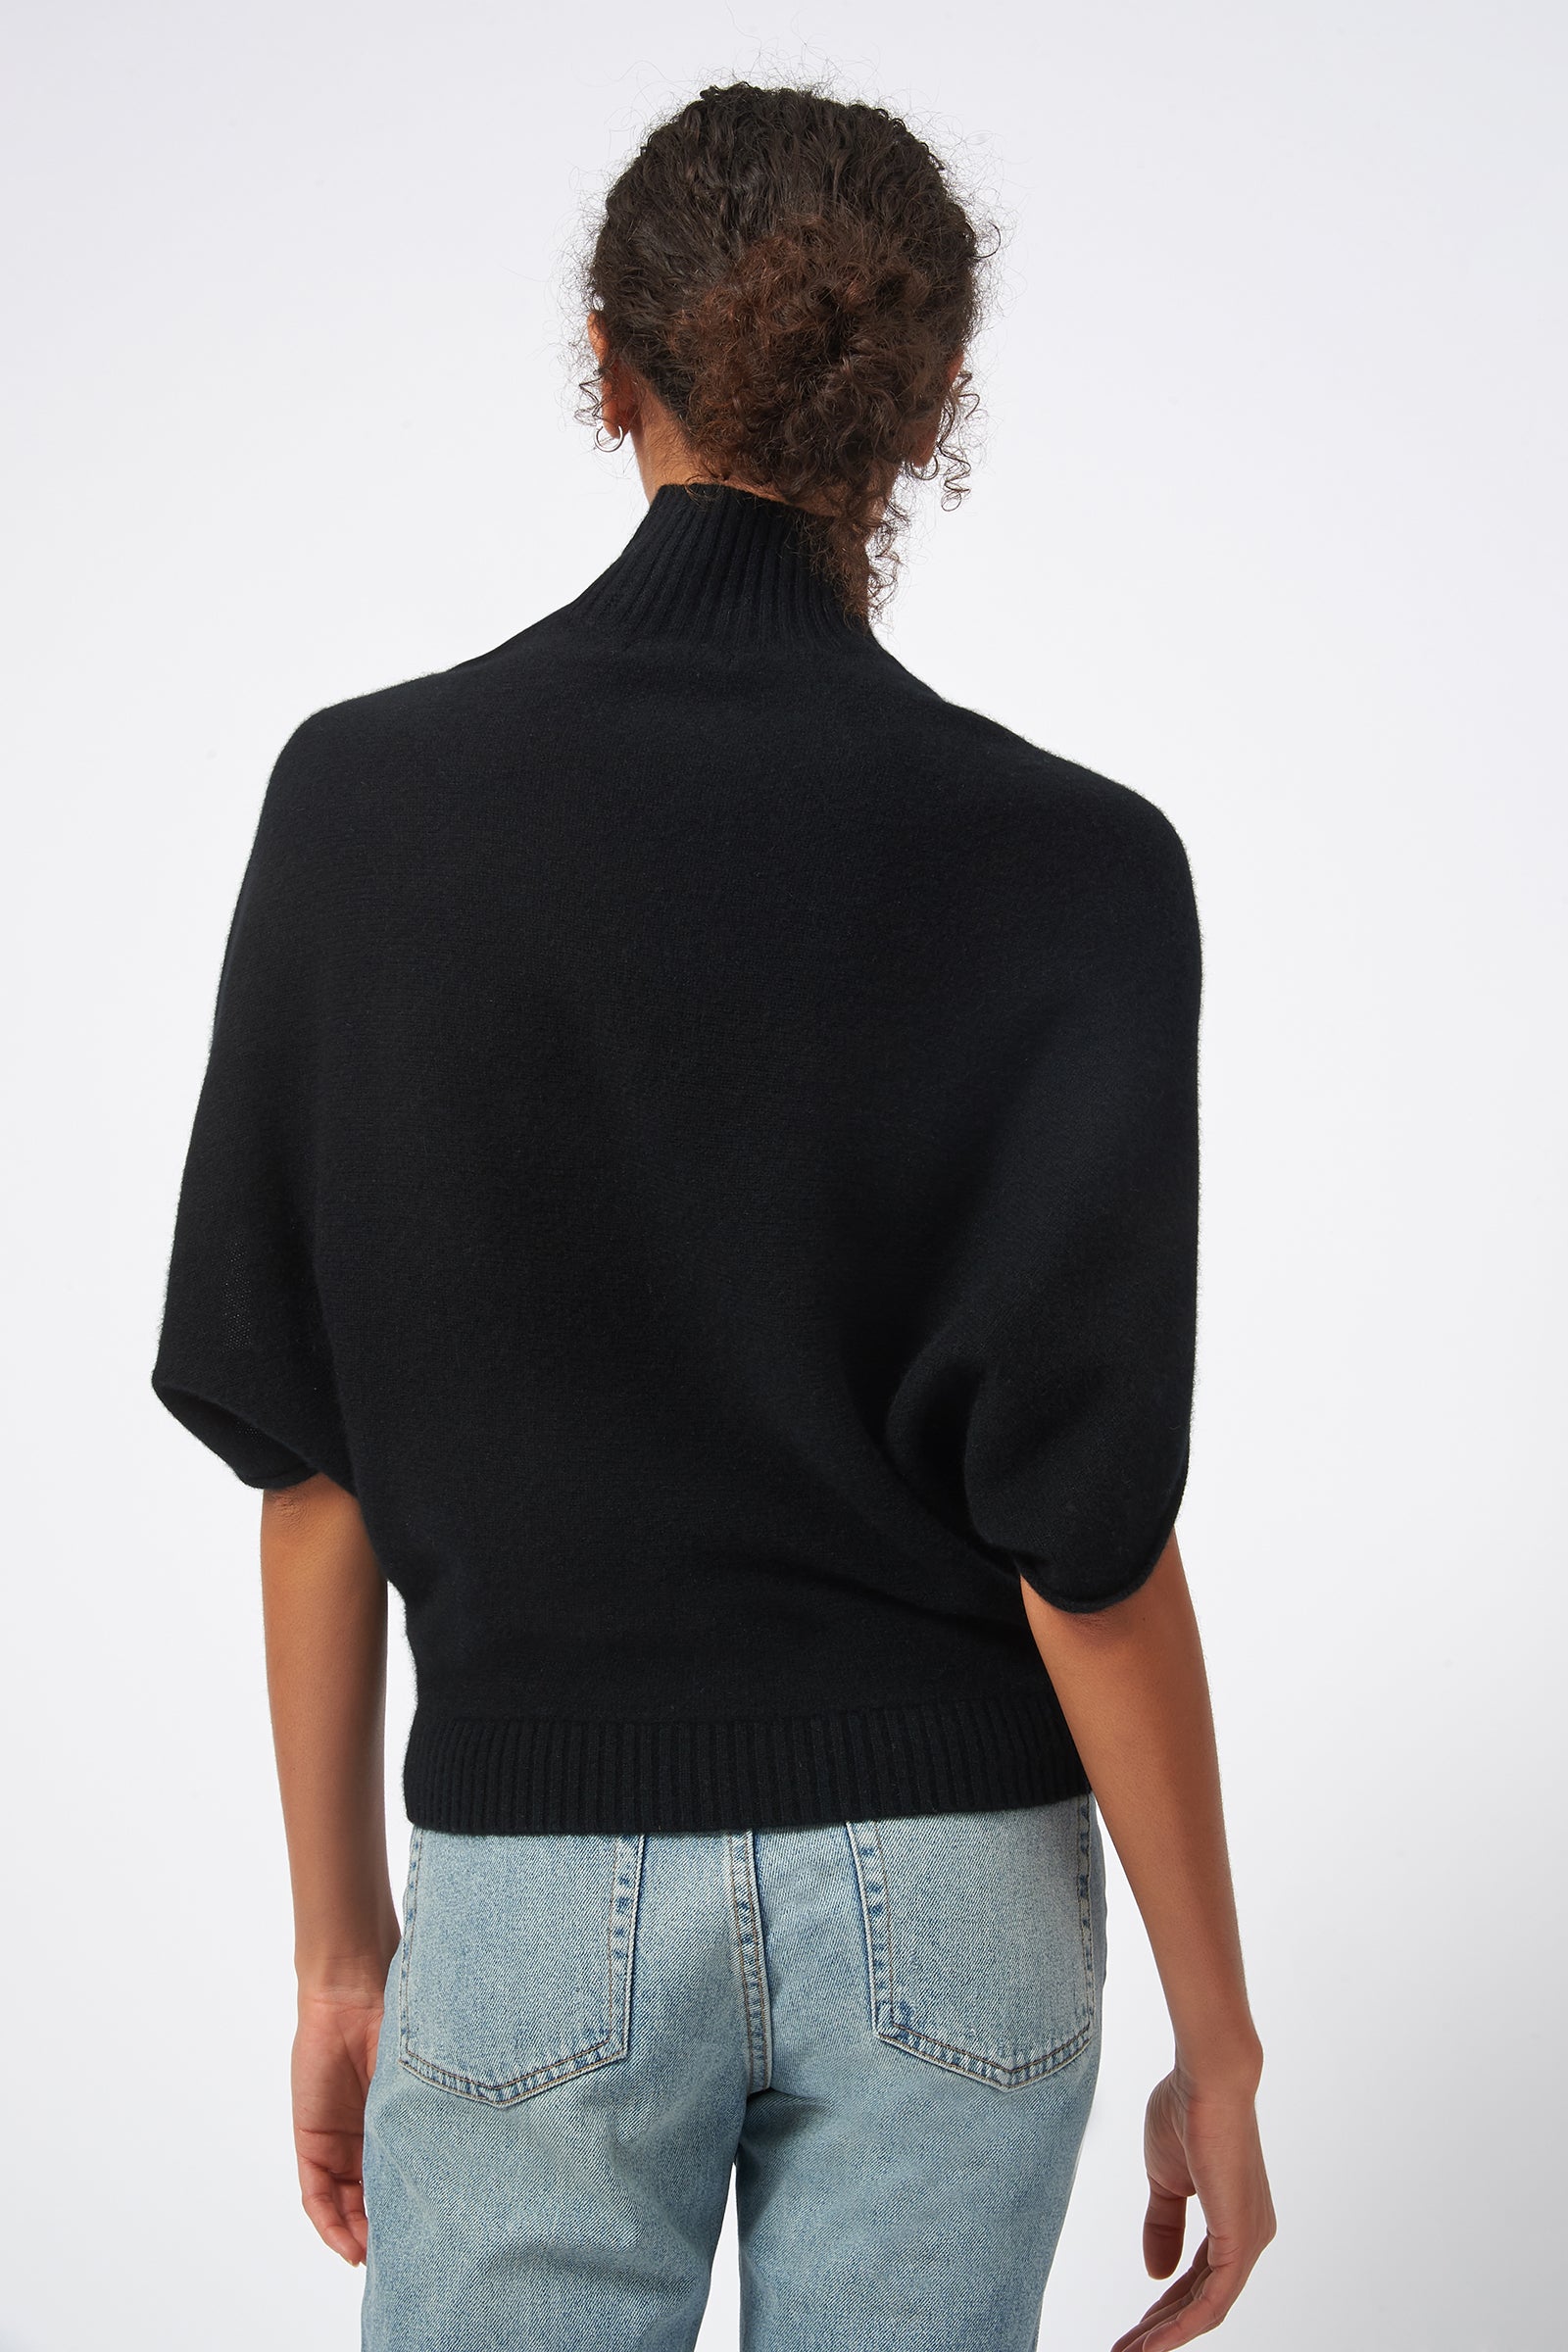 Kal Rieman Cashmere Cape Sweater in Black on Model Back View